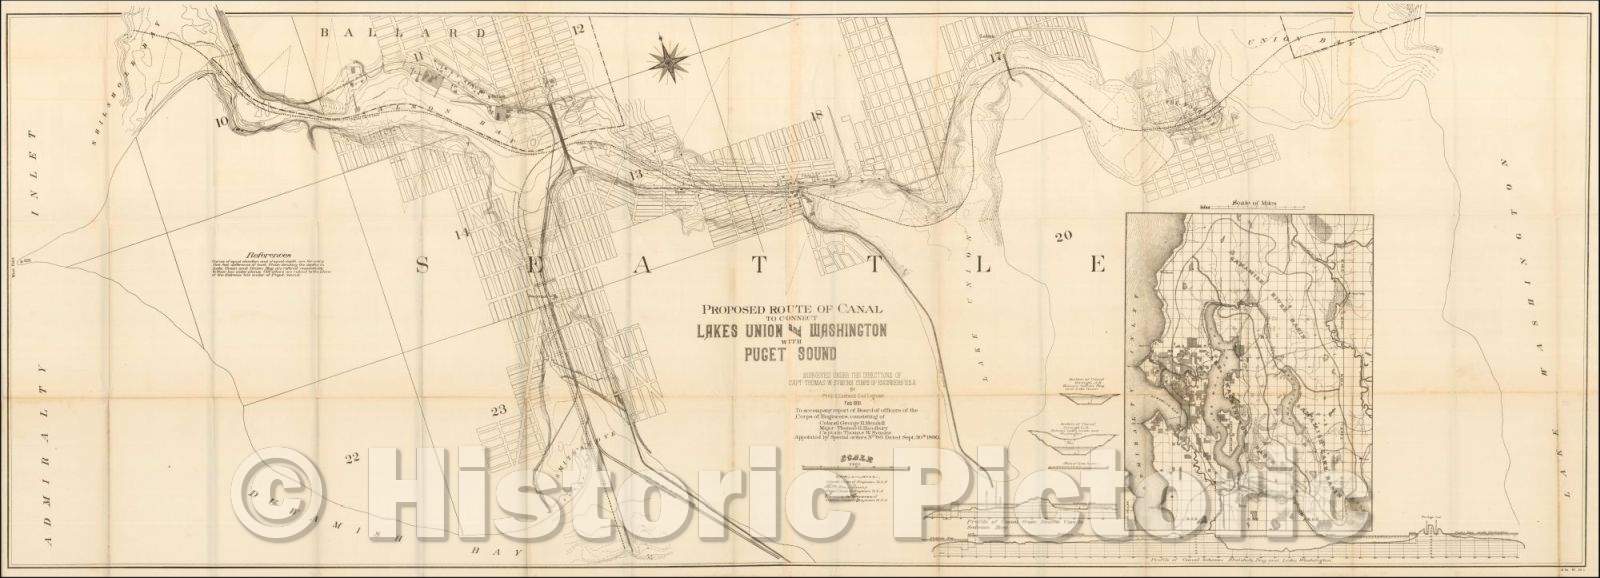 Historic Map - Proposed Route of Canal To Connect Lakes Union and Washington with Puget Sound, 1891, United States Bureau of Topographical Engineers - Vintage Wall Art